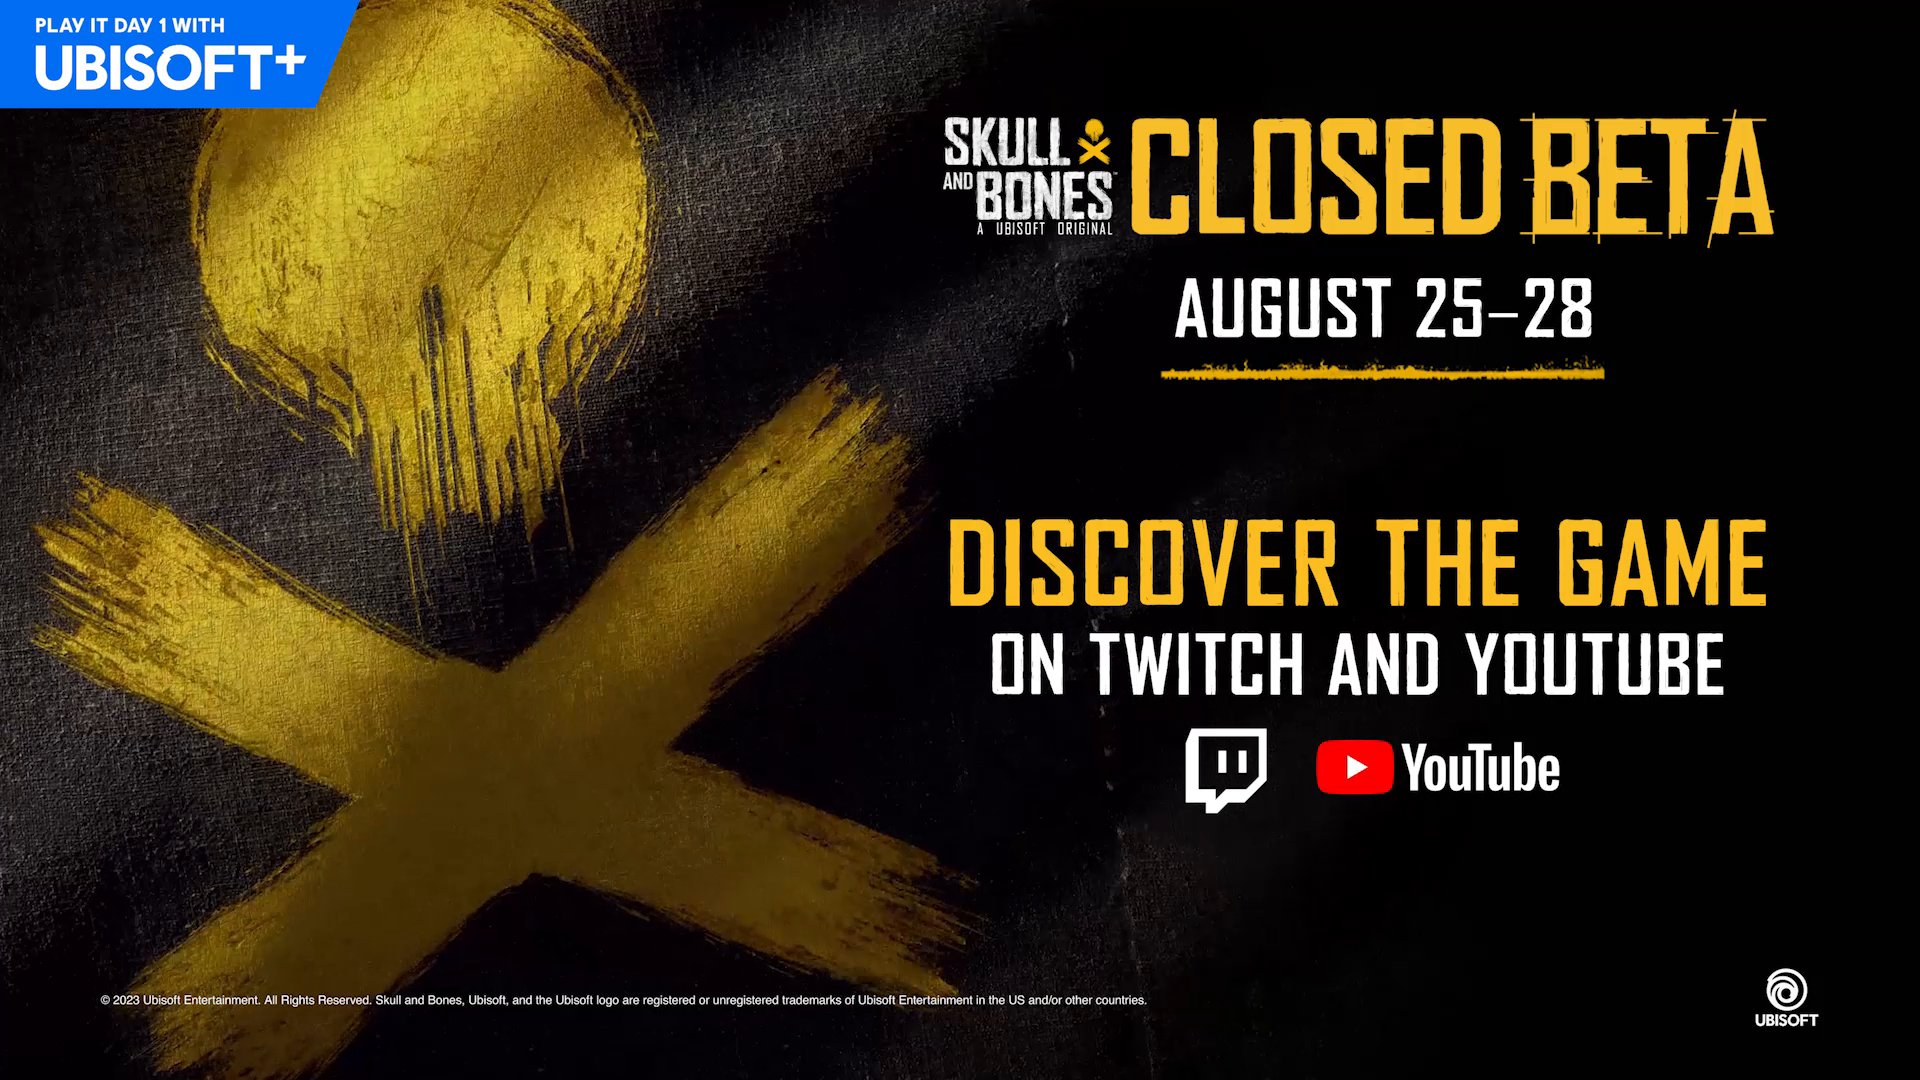 How to join the Skull and Bones closed beta